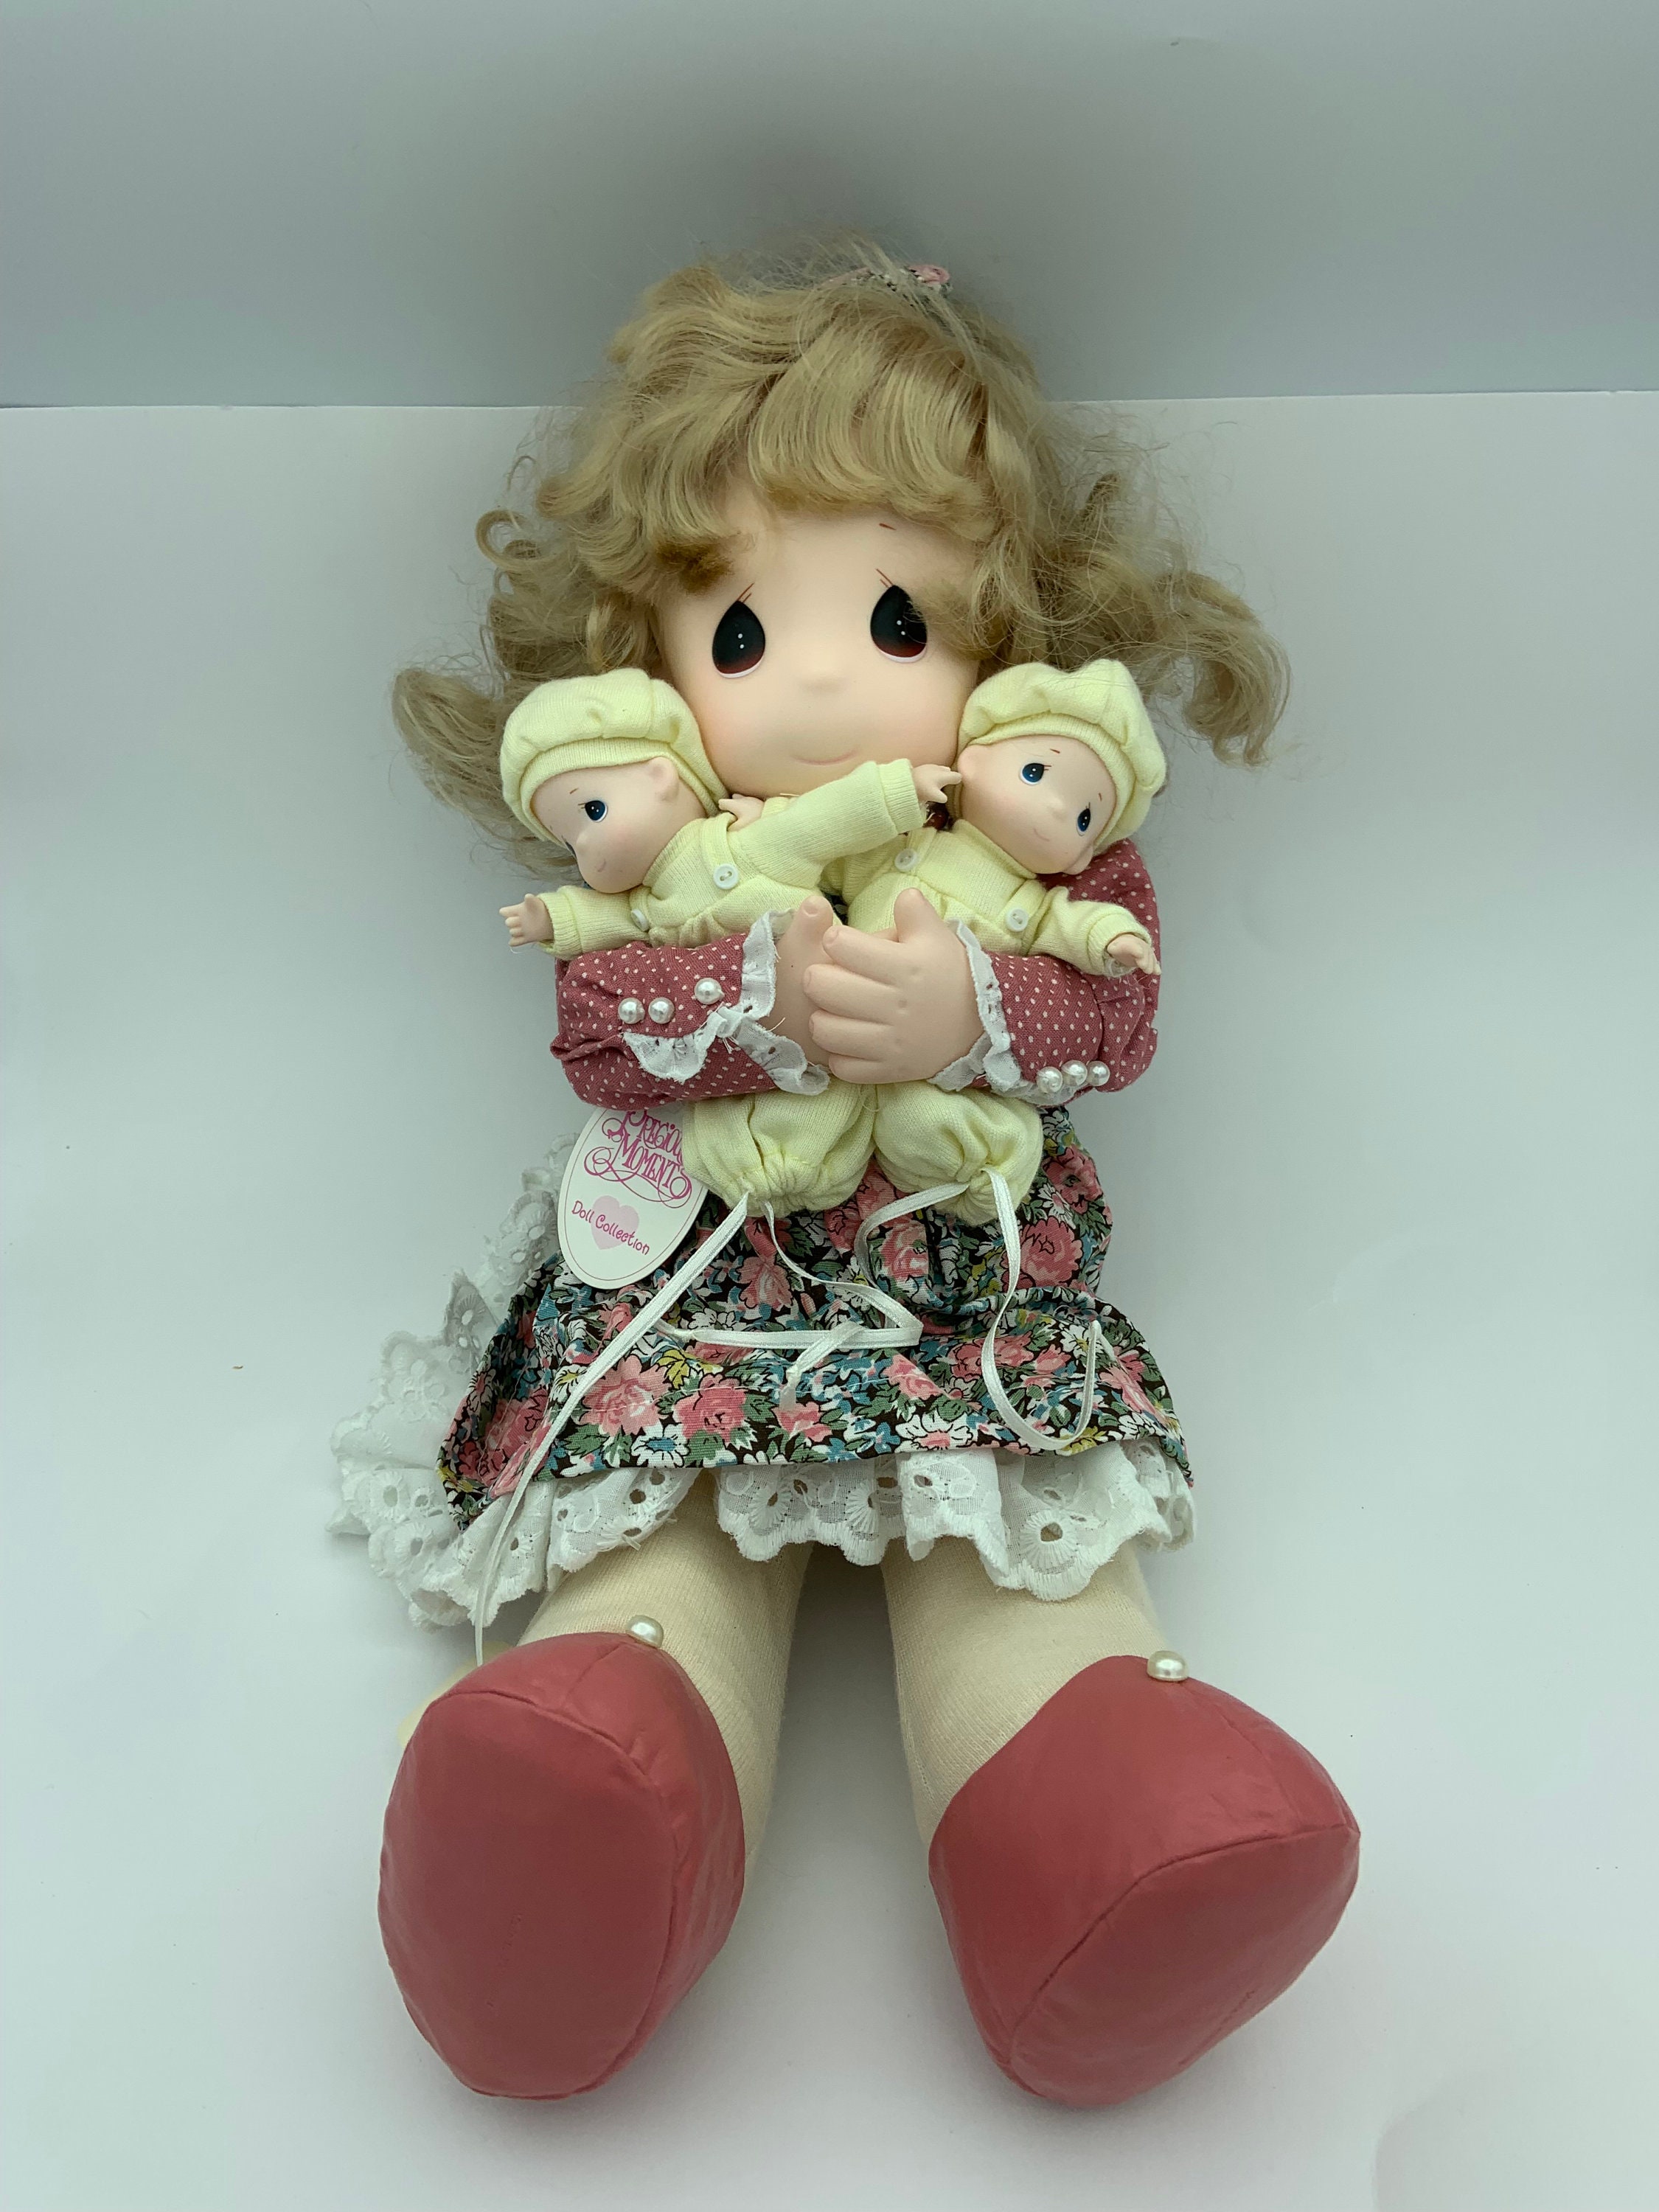 Vintage Precious Moments Doll Making Kit for Susie Vintage Doll Kit Make A  Doll Precious Moments Doll Friendship Gift Birthday Gift 